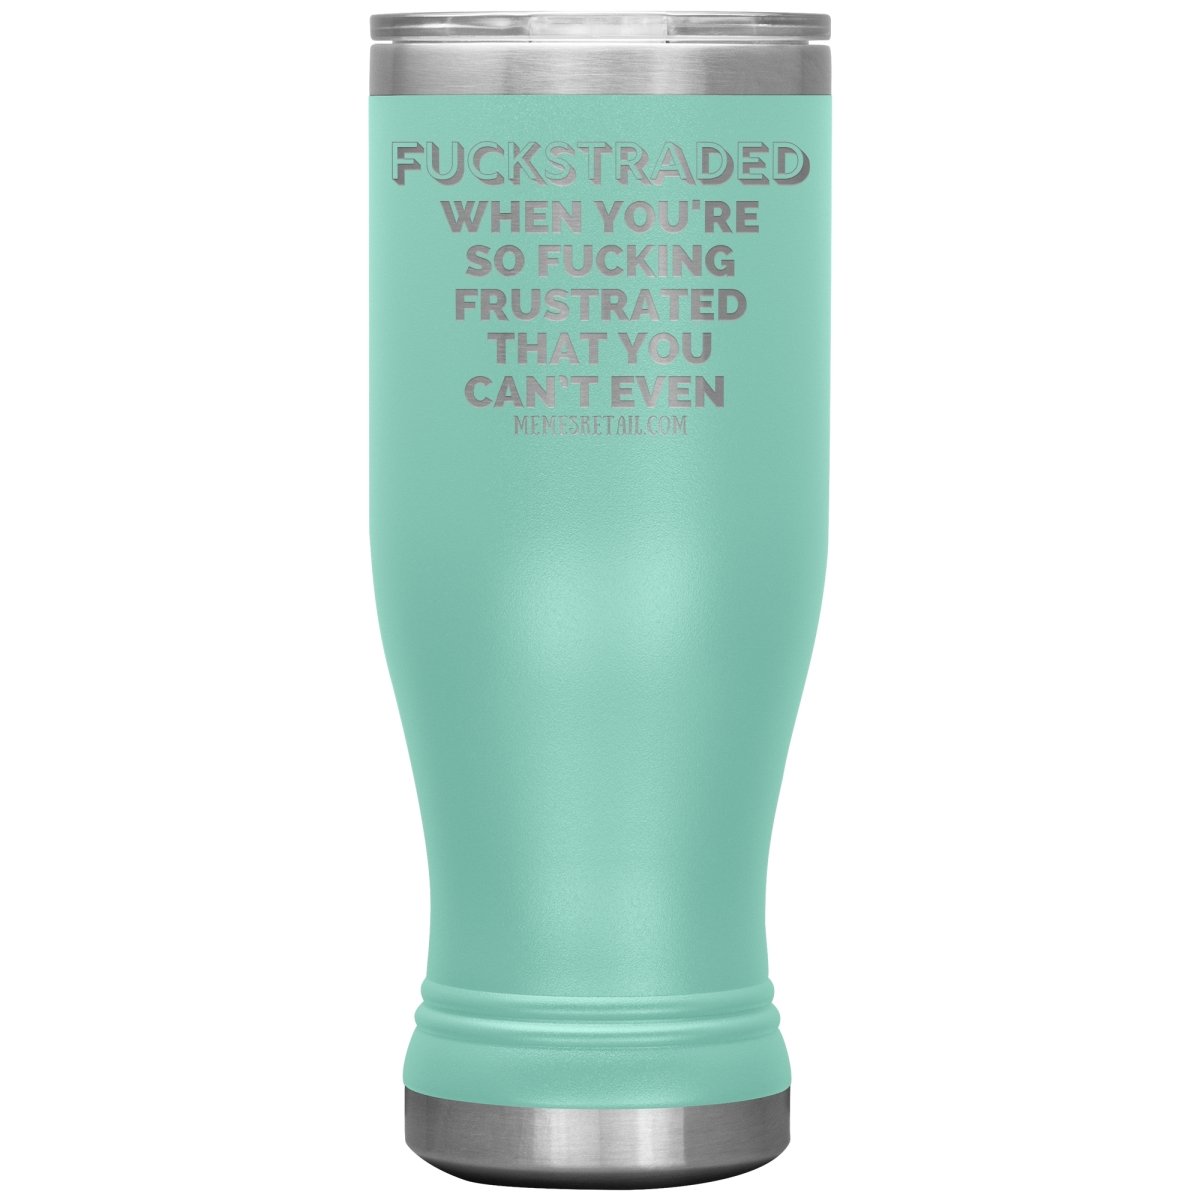 Fuckstraded, When You're So Fucking Frustrated That You Can’t Even Tumblers, 20oz BOHO Insulated Tumbler / Teal - MemesRetail.com